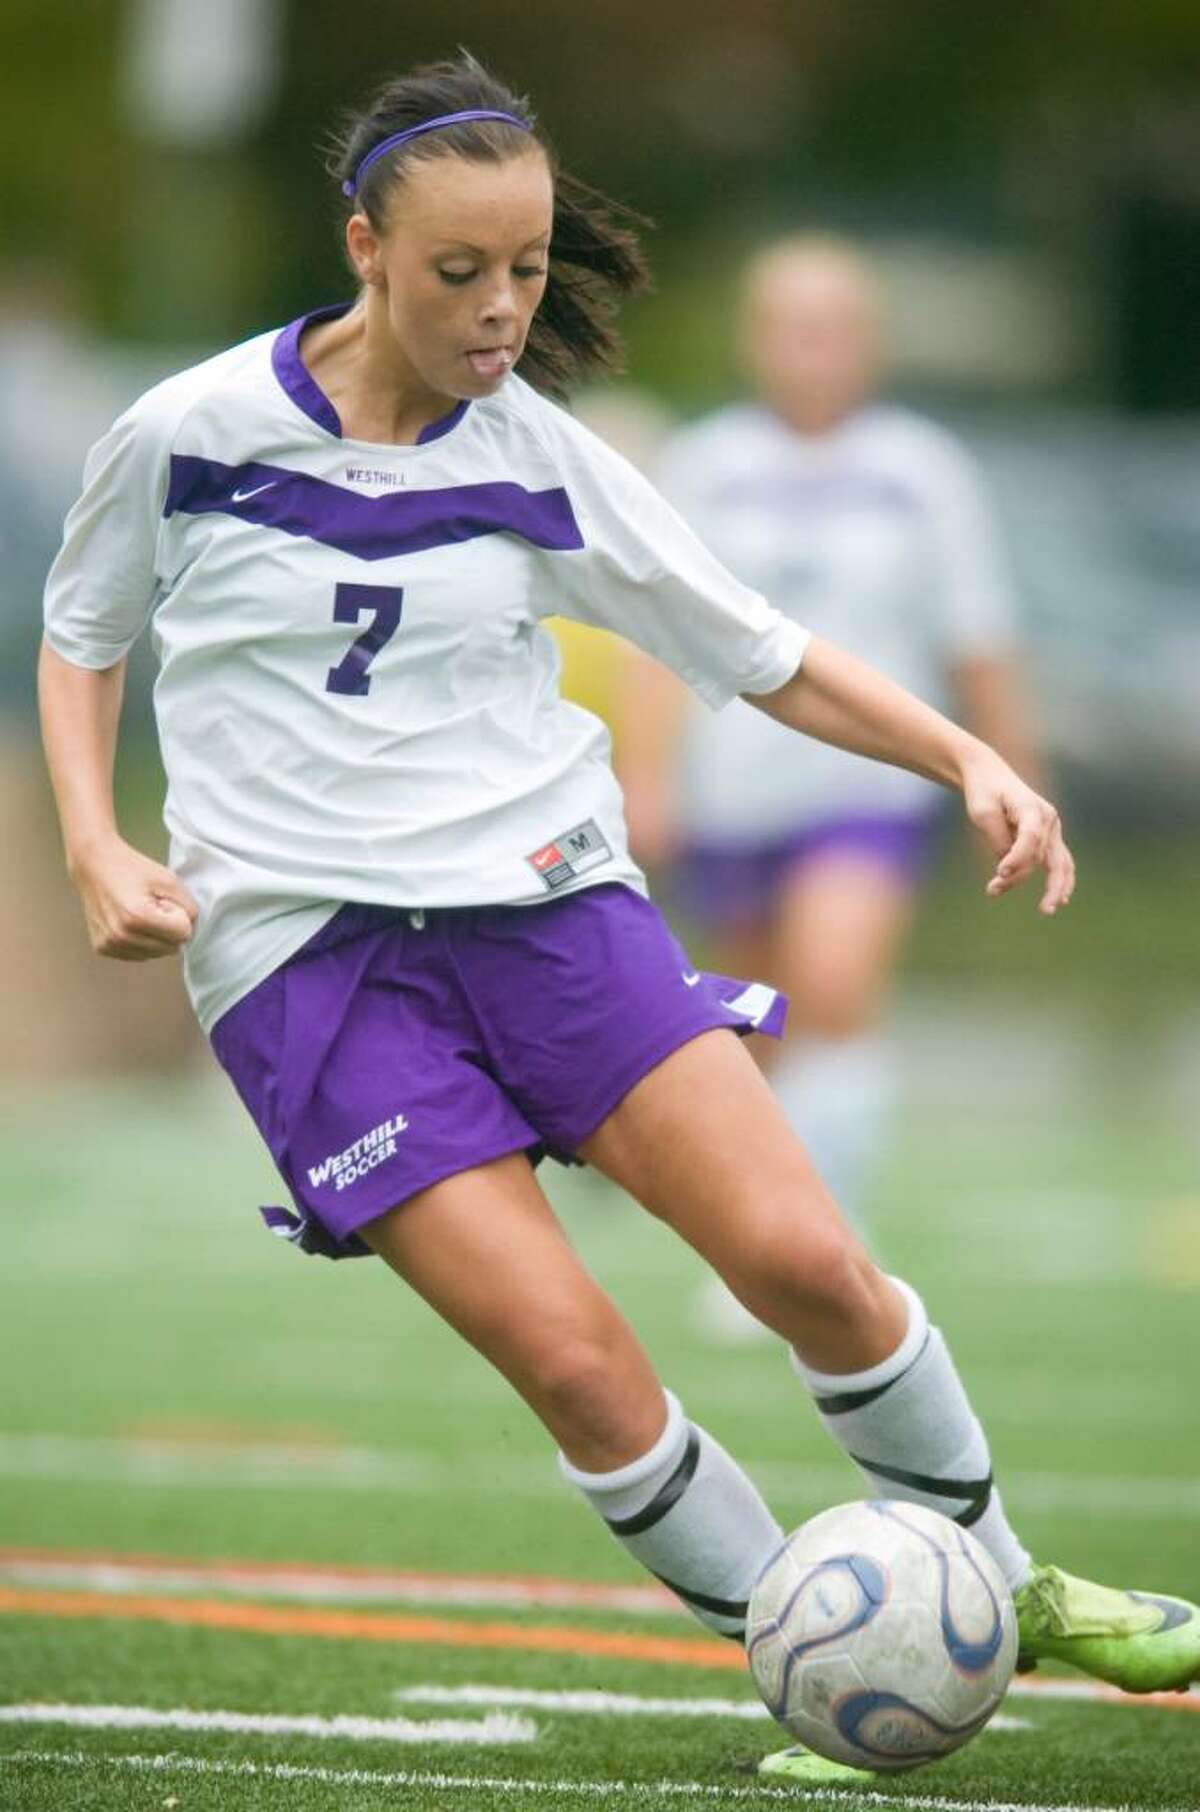 Westhill's Penny Cote during an FCIAC girls soccer match against Danbury High School at Westhill High School in Stamford on Wednesday, Sept. 30, 2009.